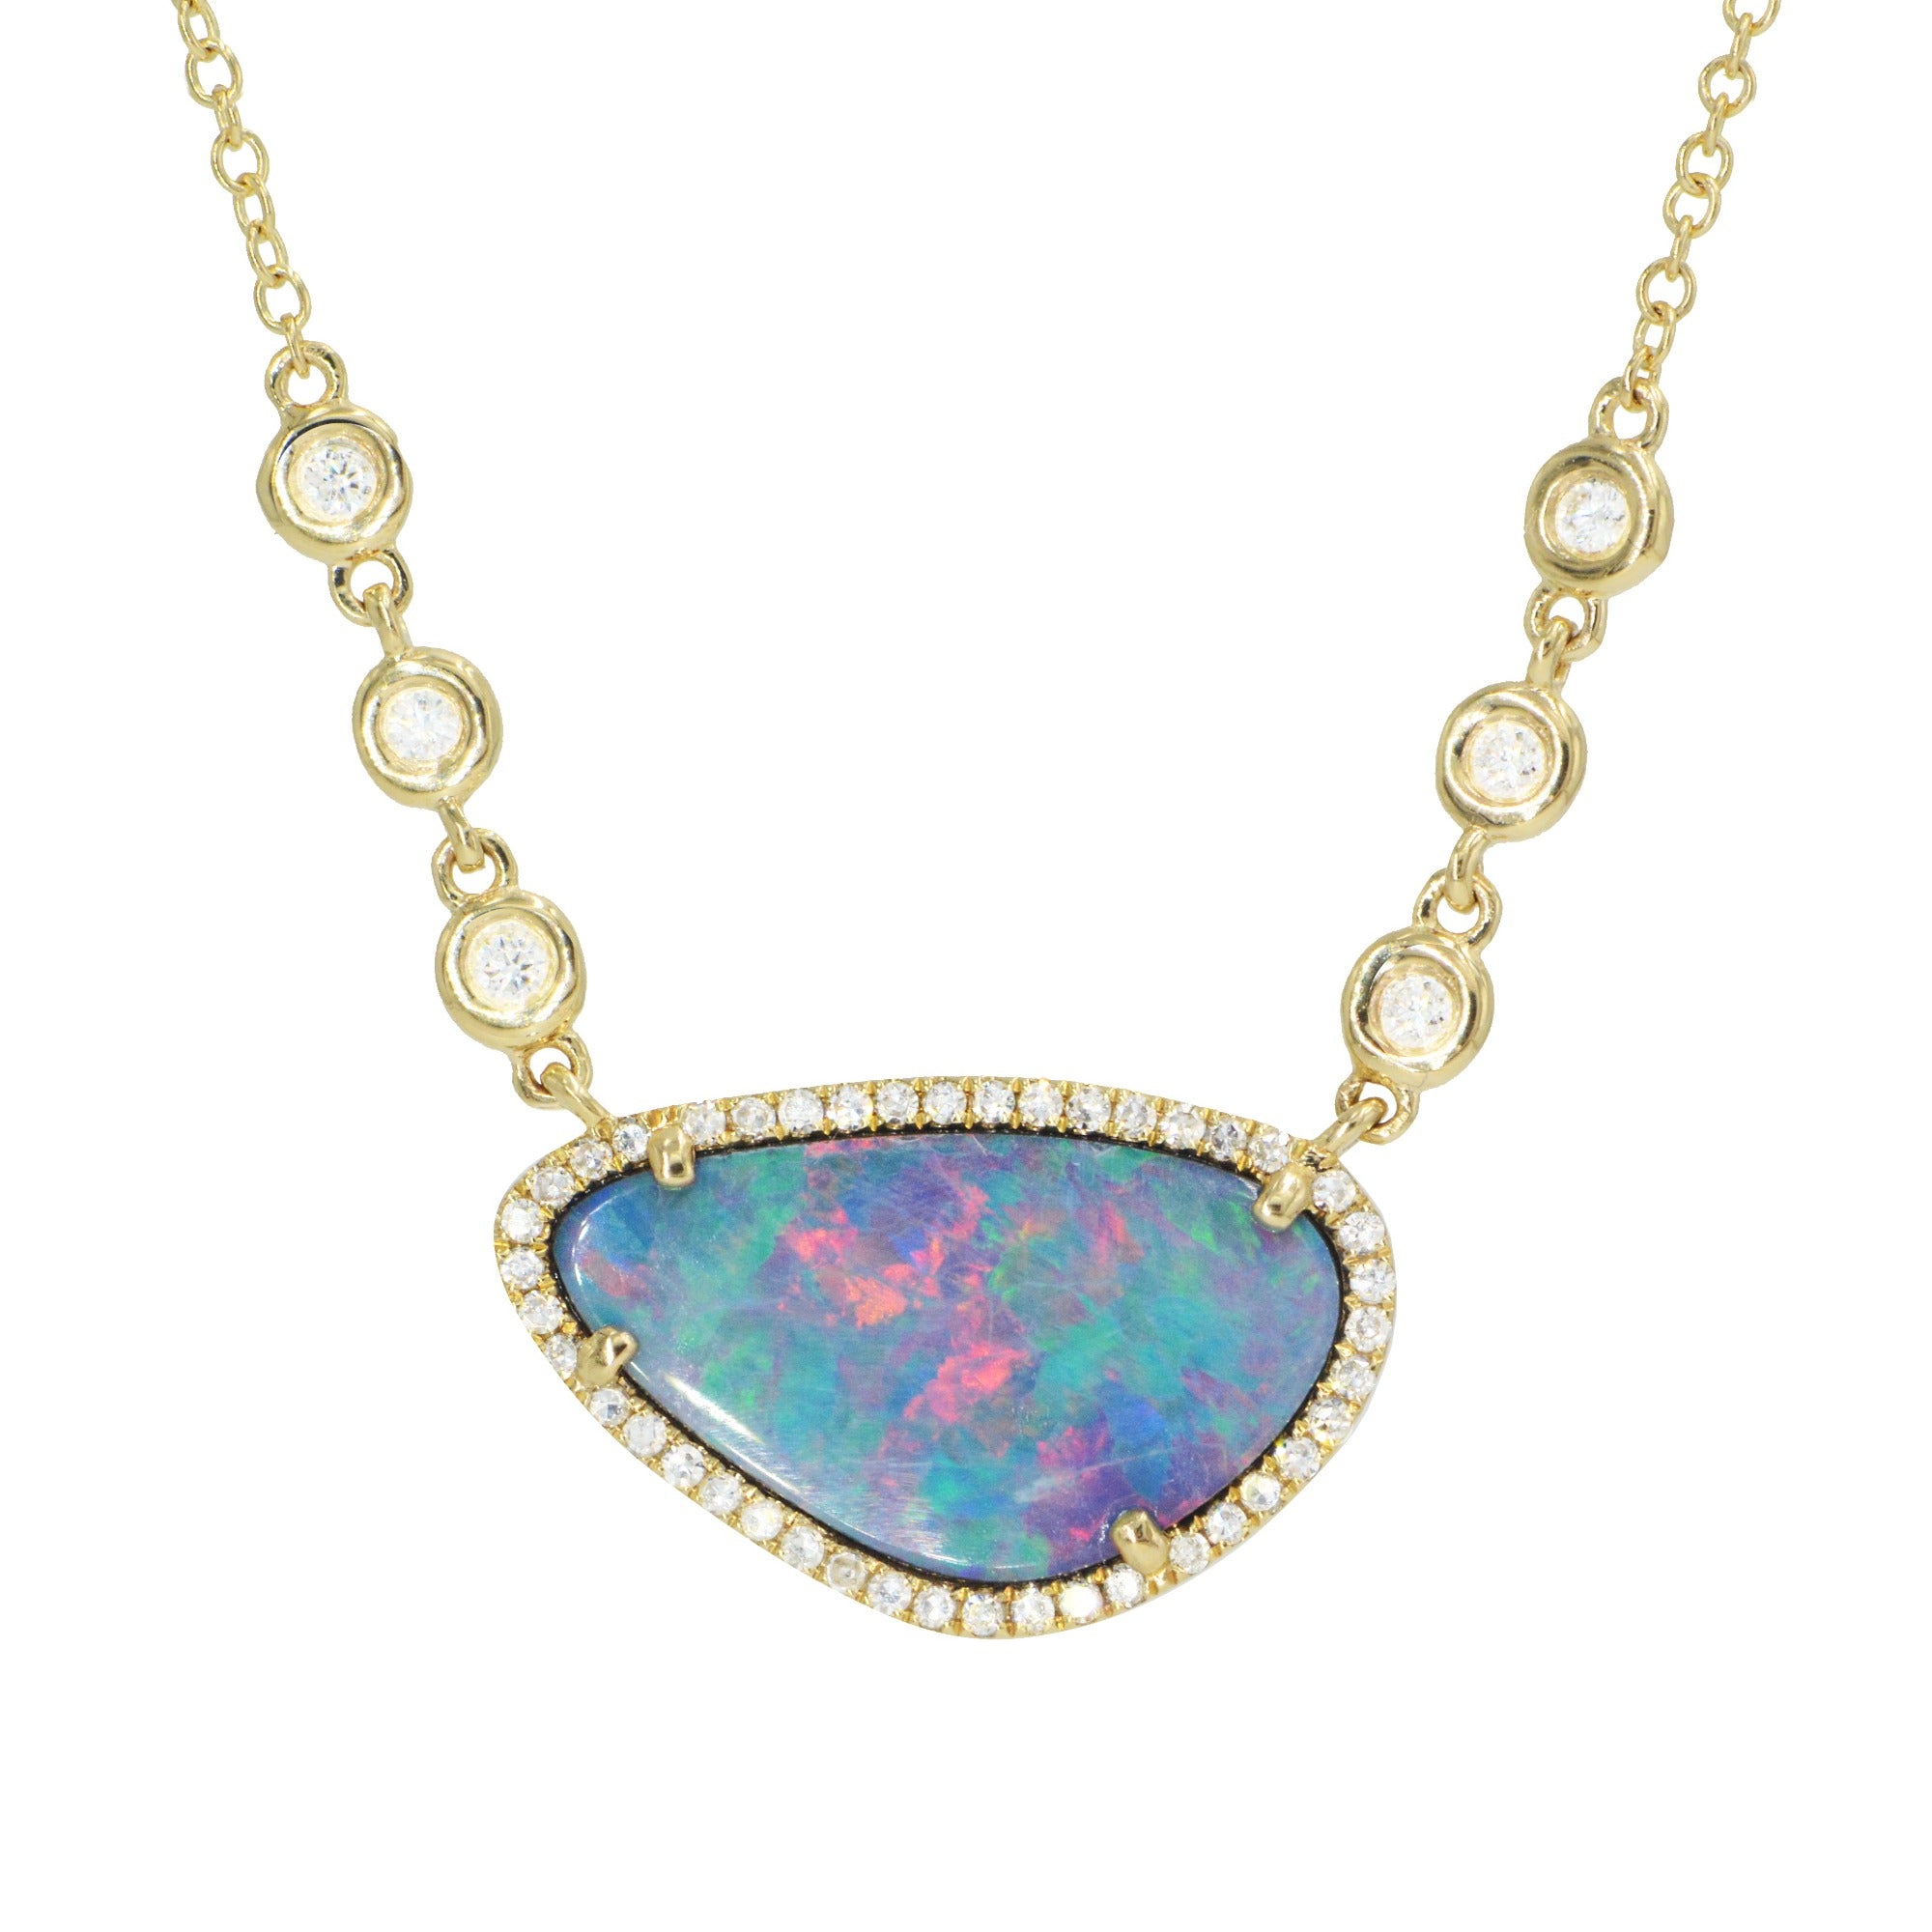 boulder opal necklace with in line diamonds in 14k gold